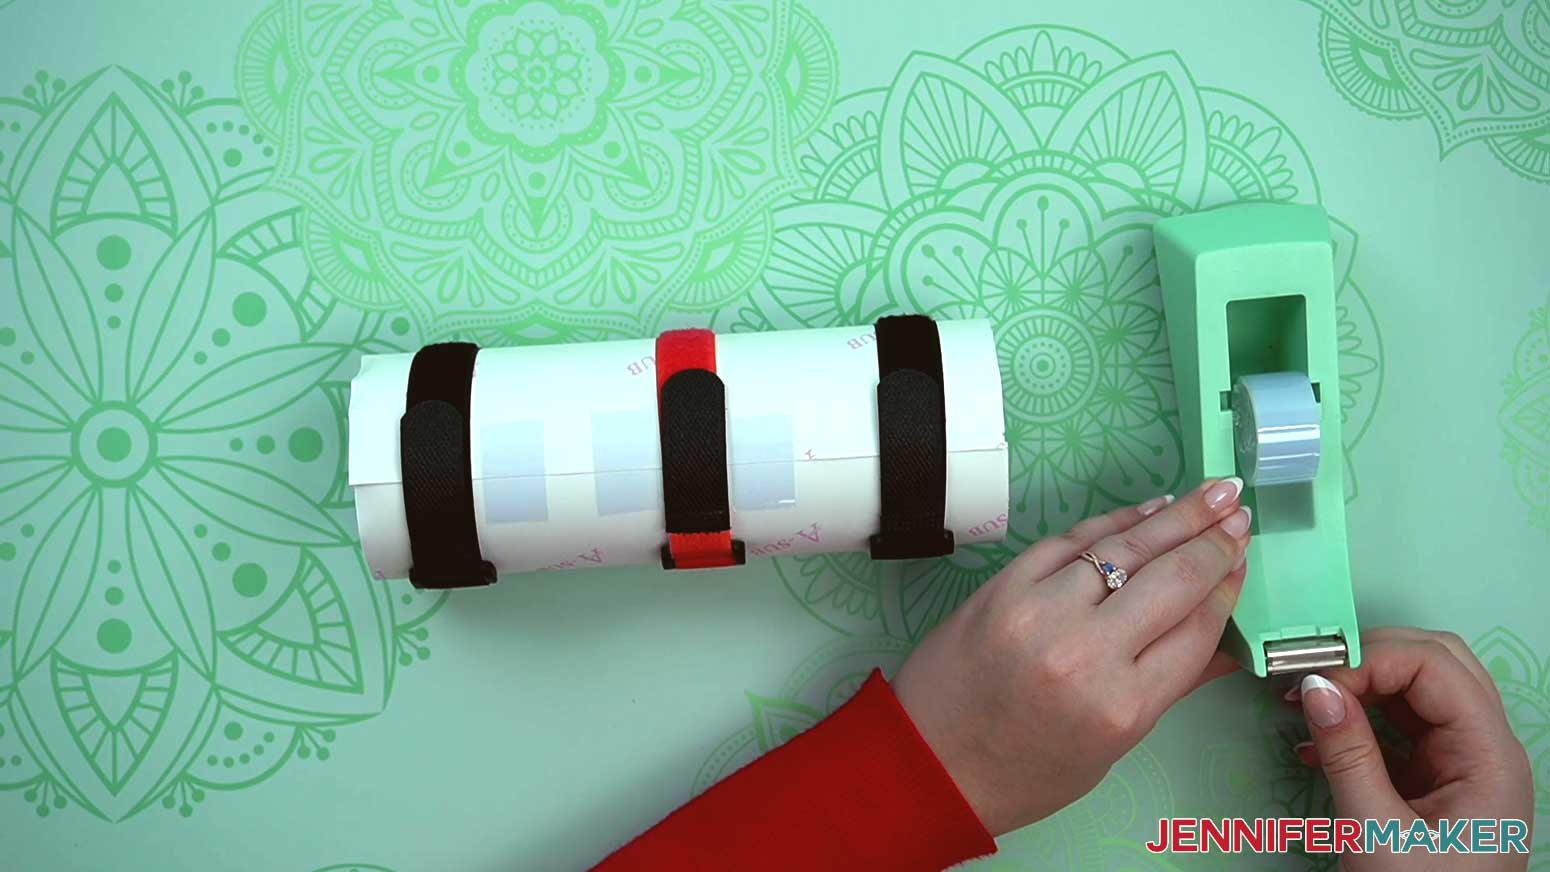 Continue to place tape along the entire seam while the straps are in place.